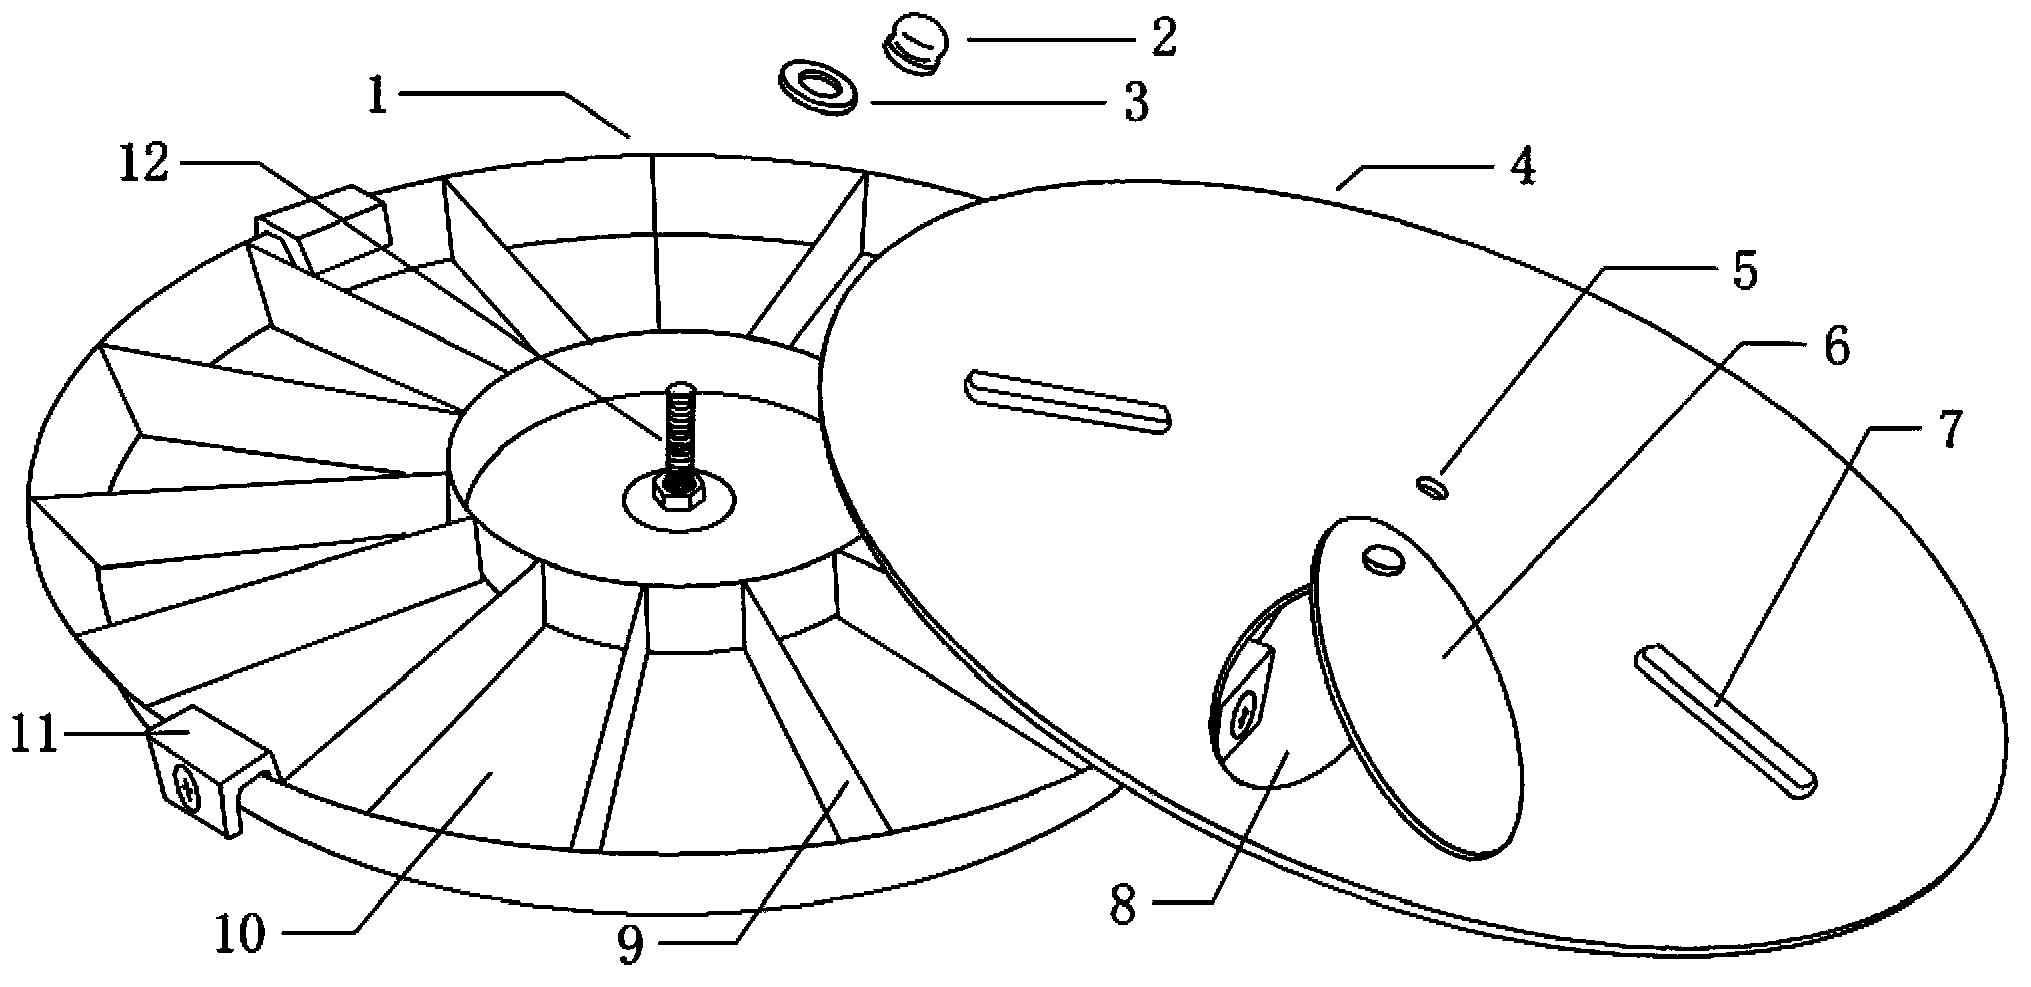 Mouse irradiation disc fixing device